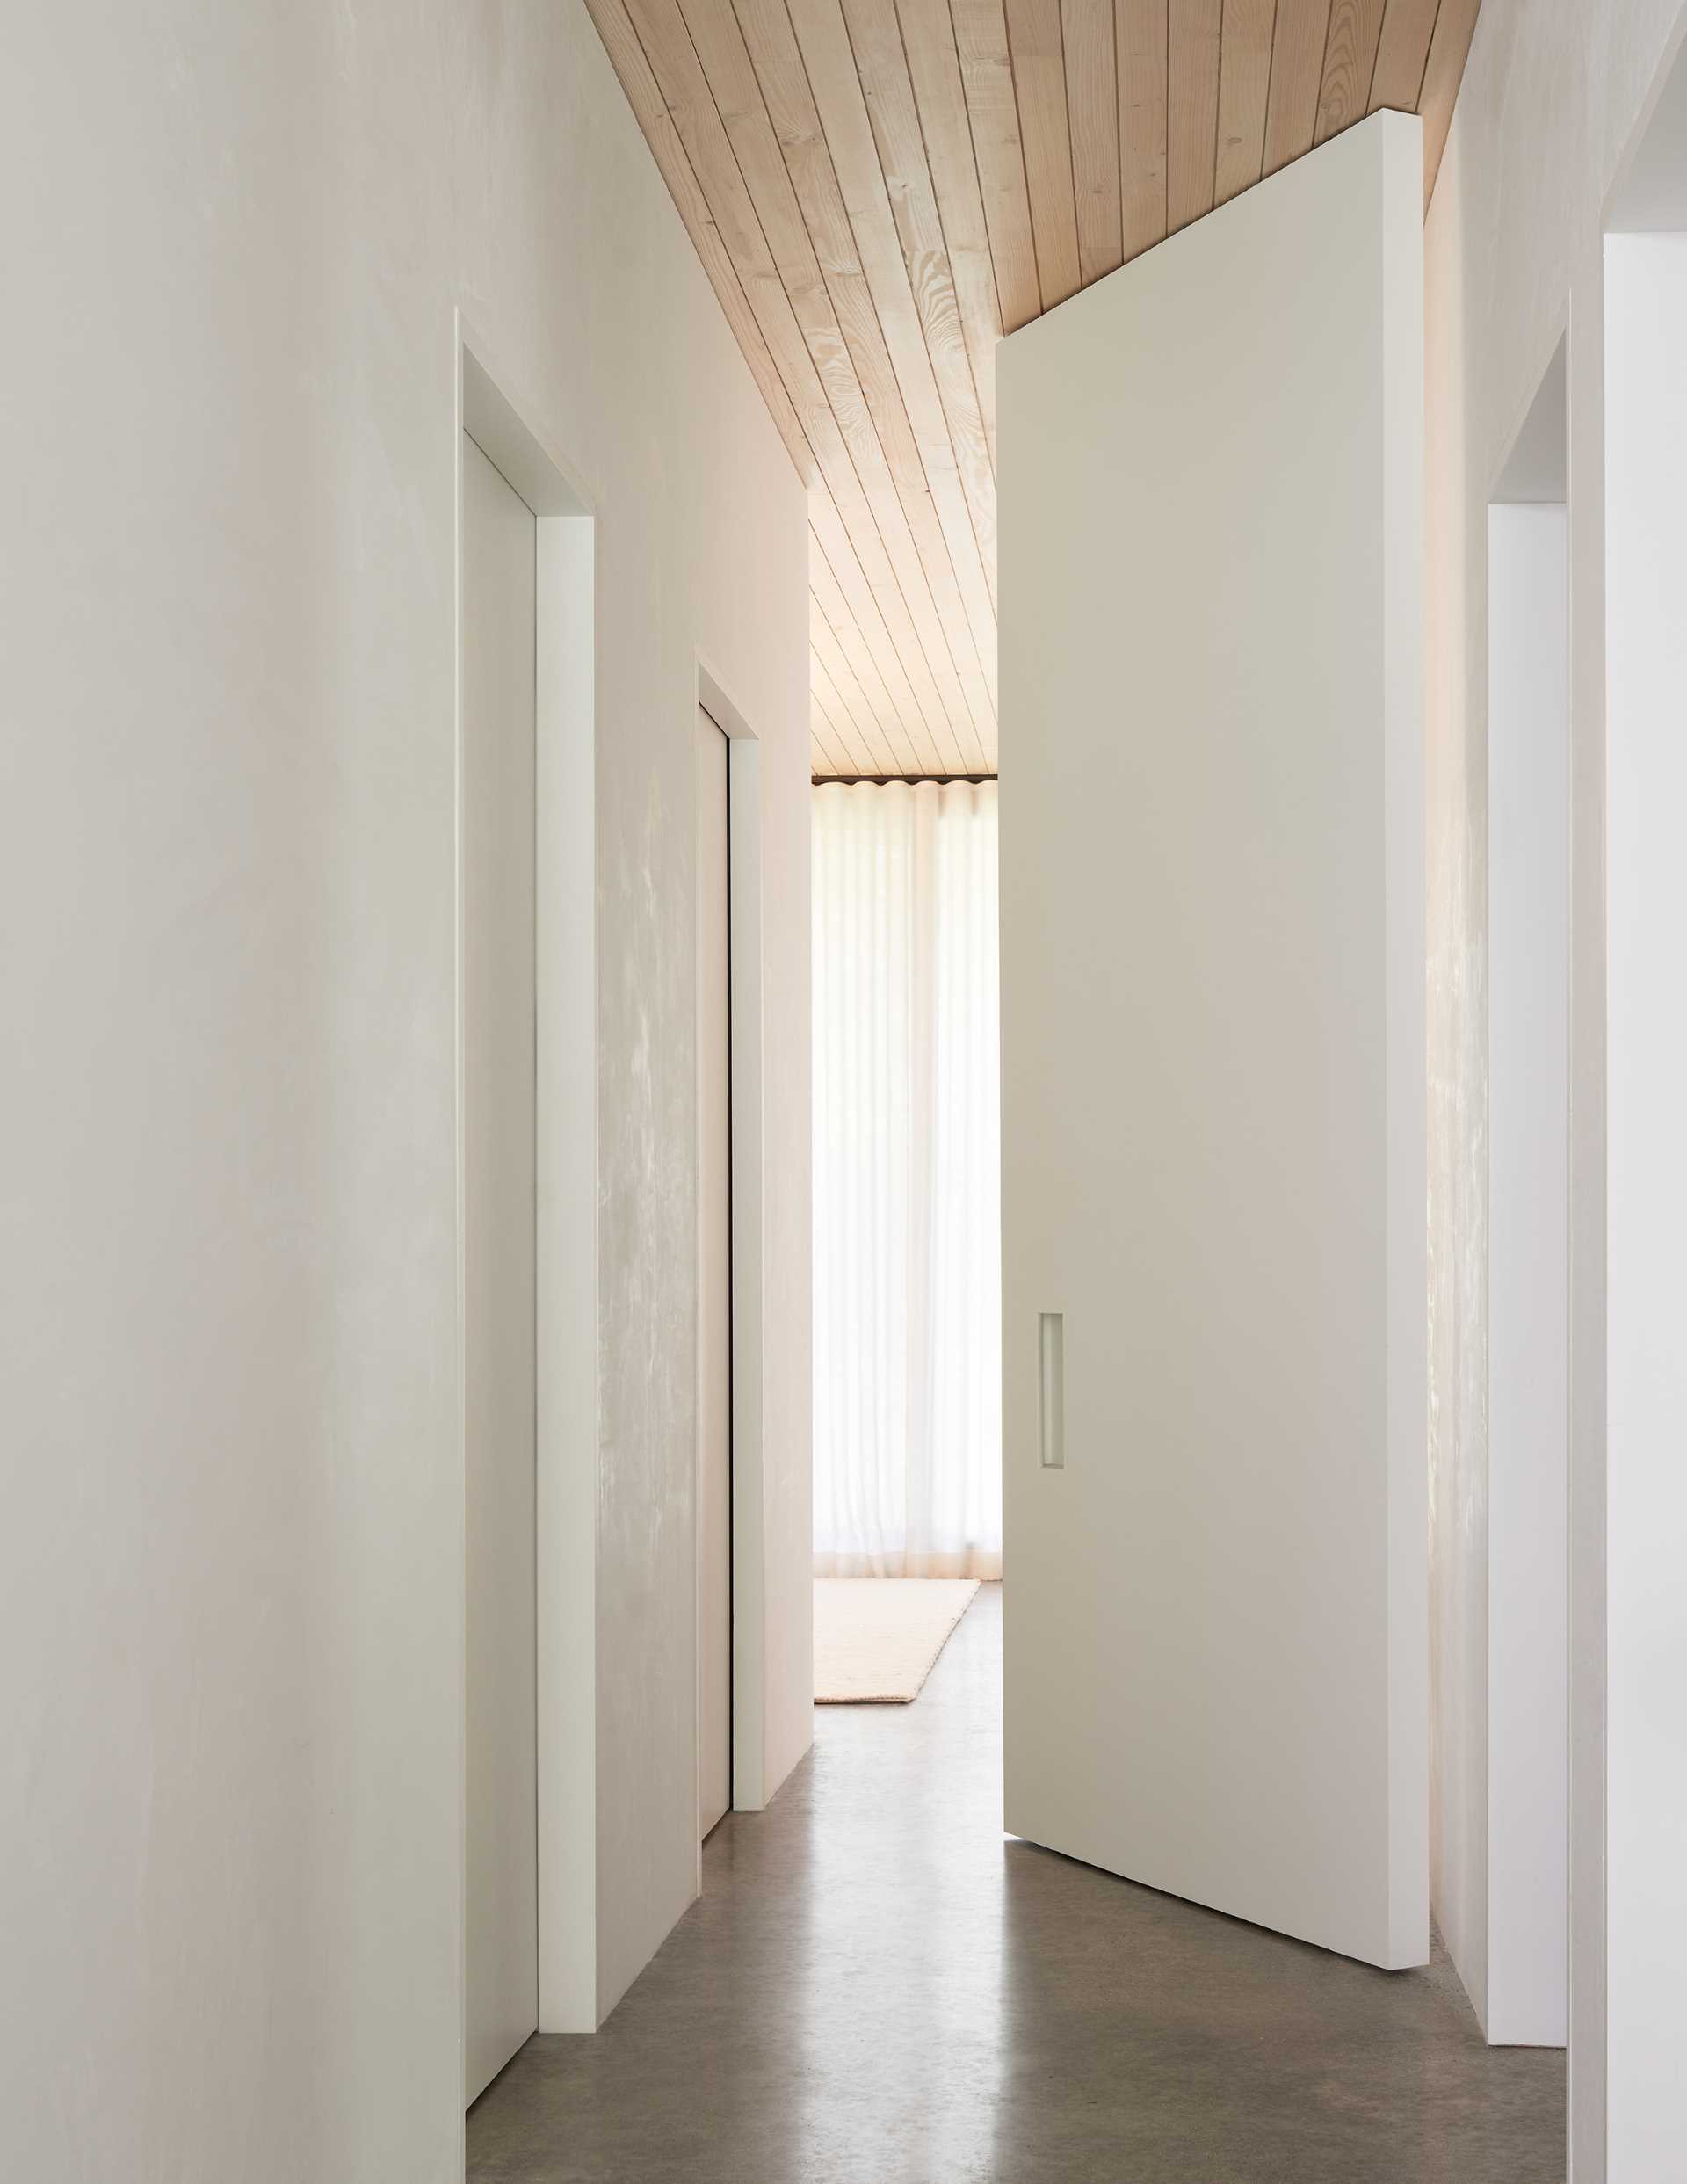 The primary bedroom, located at the end of the hallway, is hidden behind a custom floor-to-ceiling pivoting door.